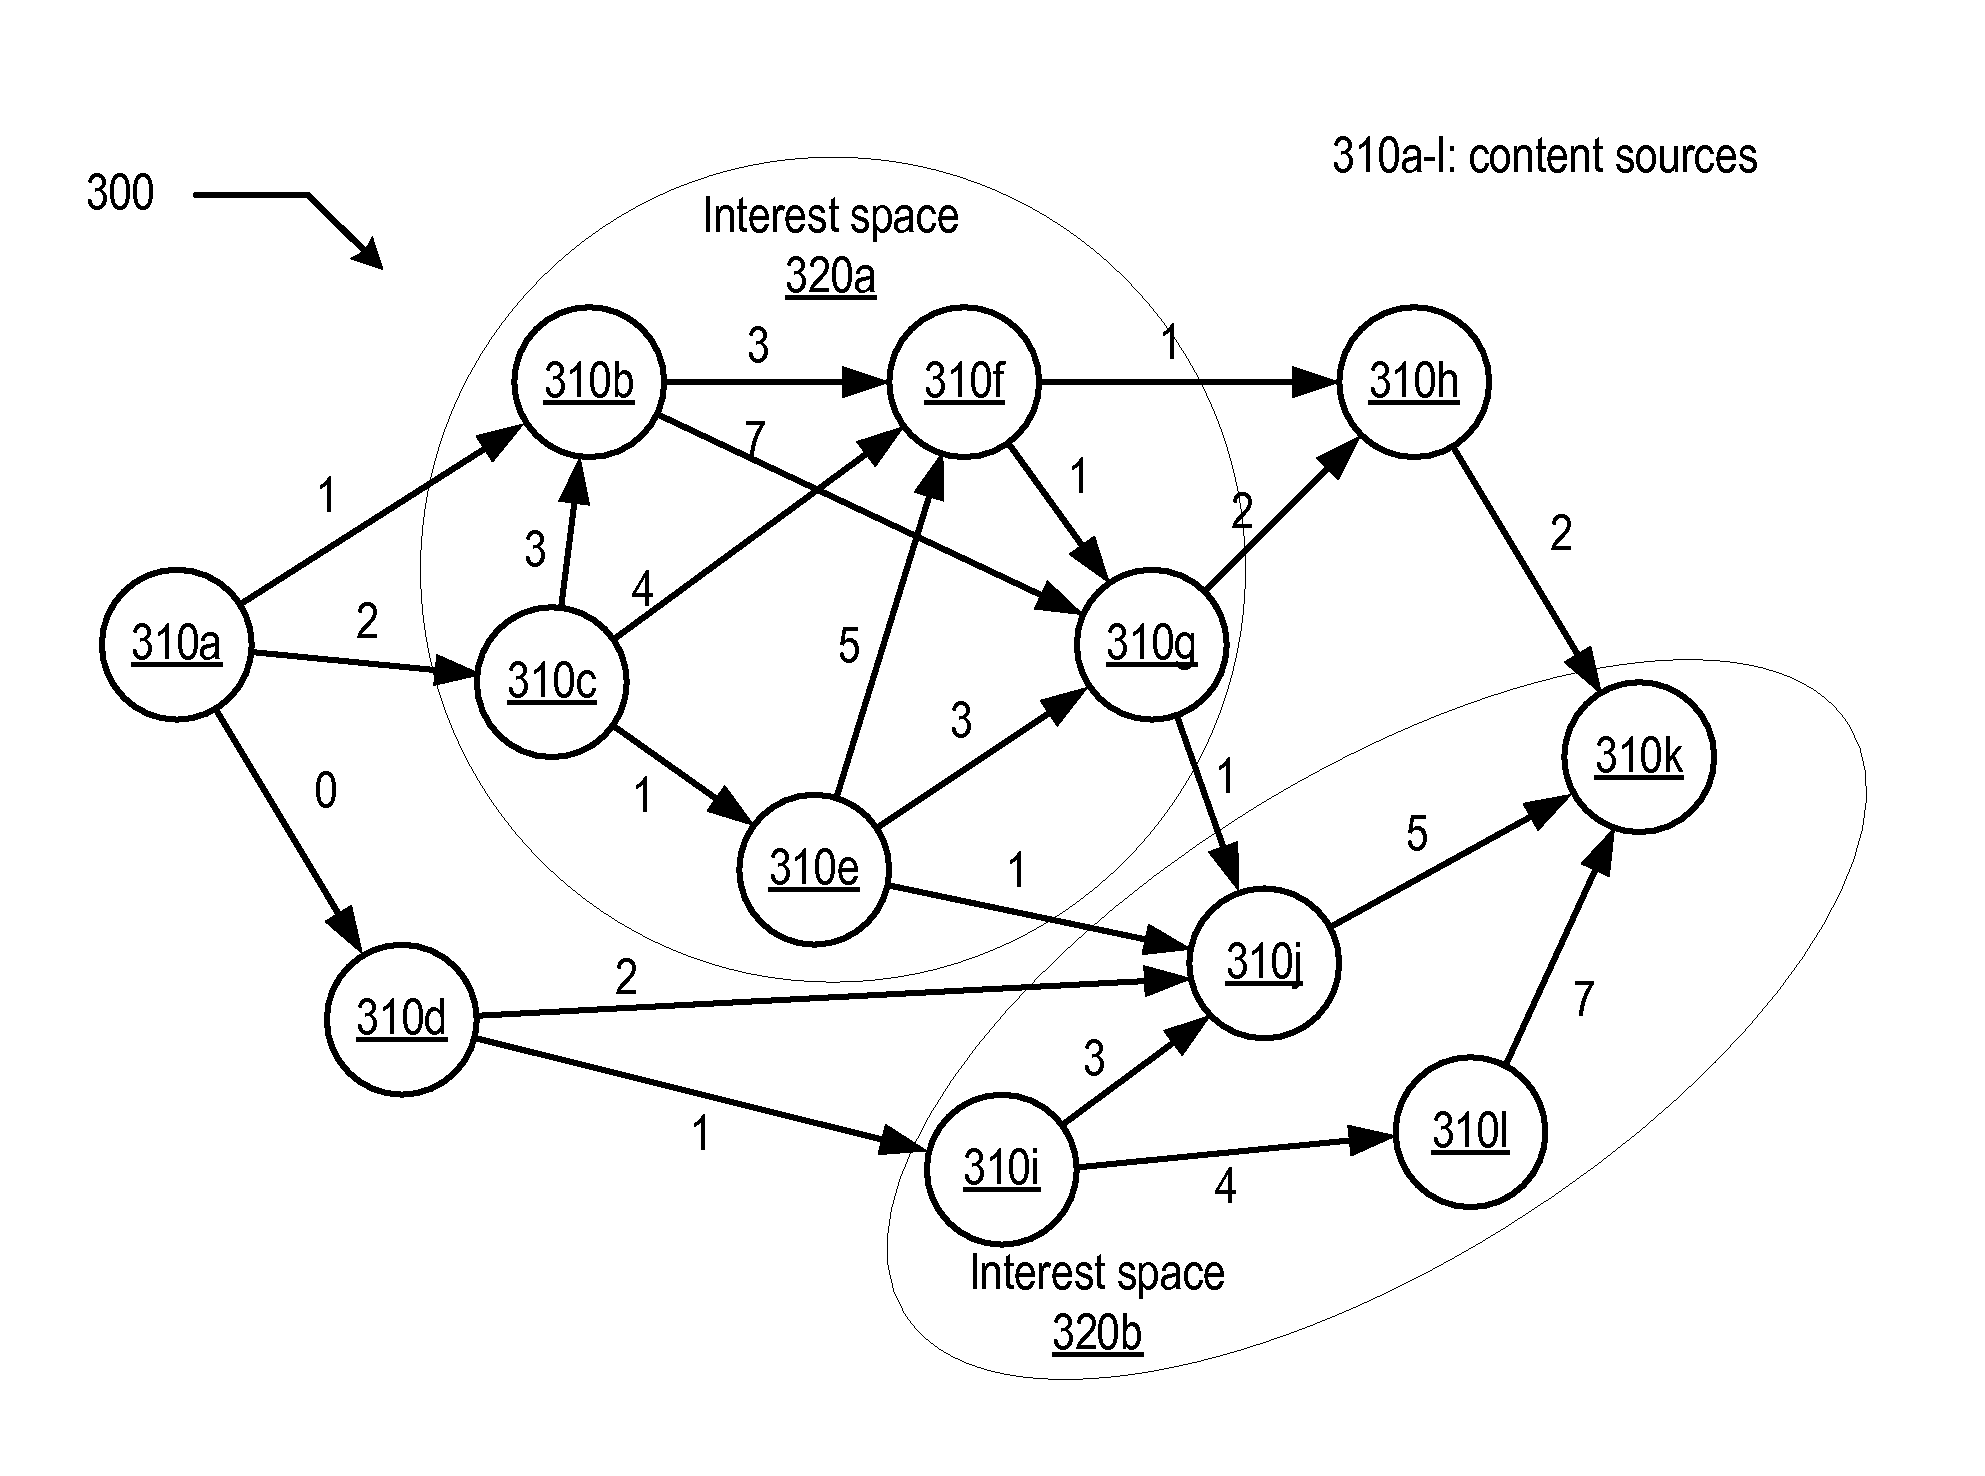 Method and system for occurrence frequency-based scaling of navigation path weights among online content sources